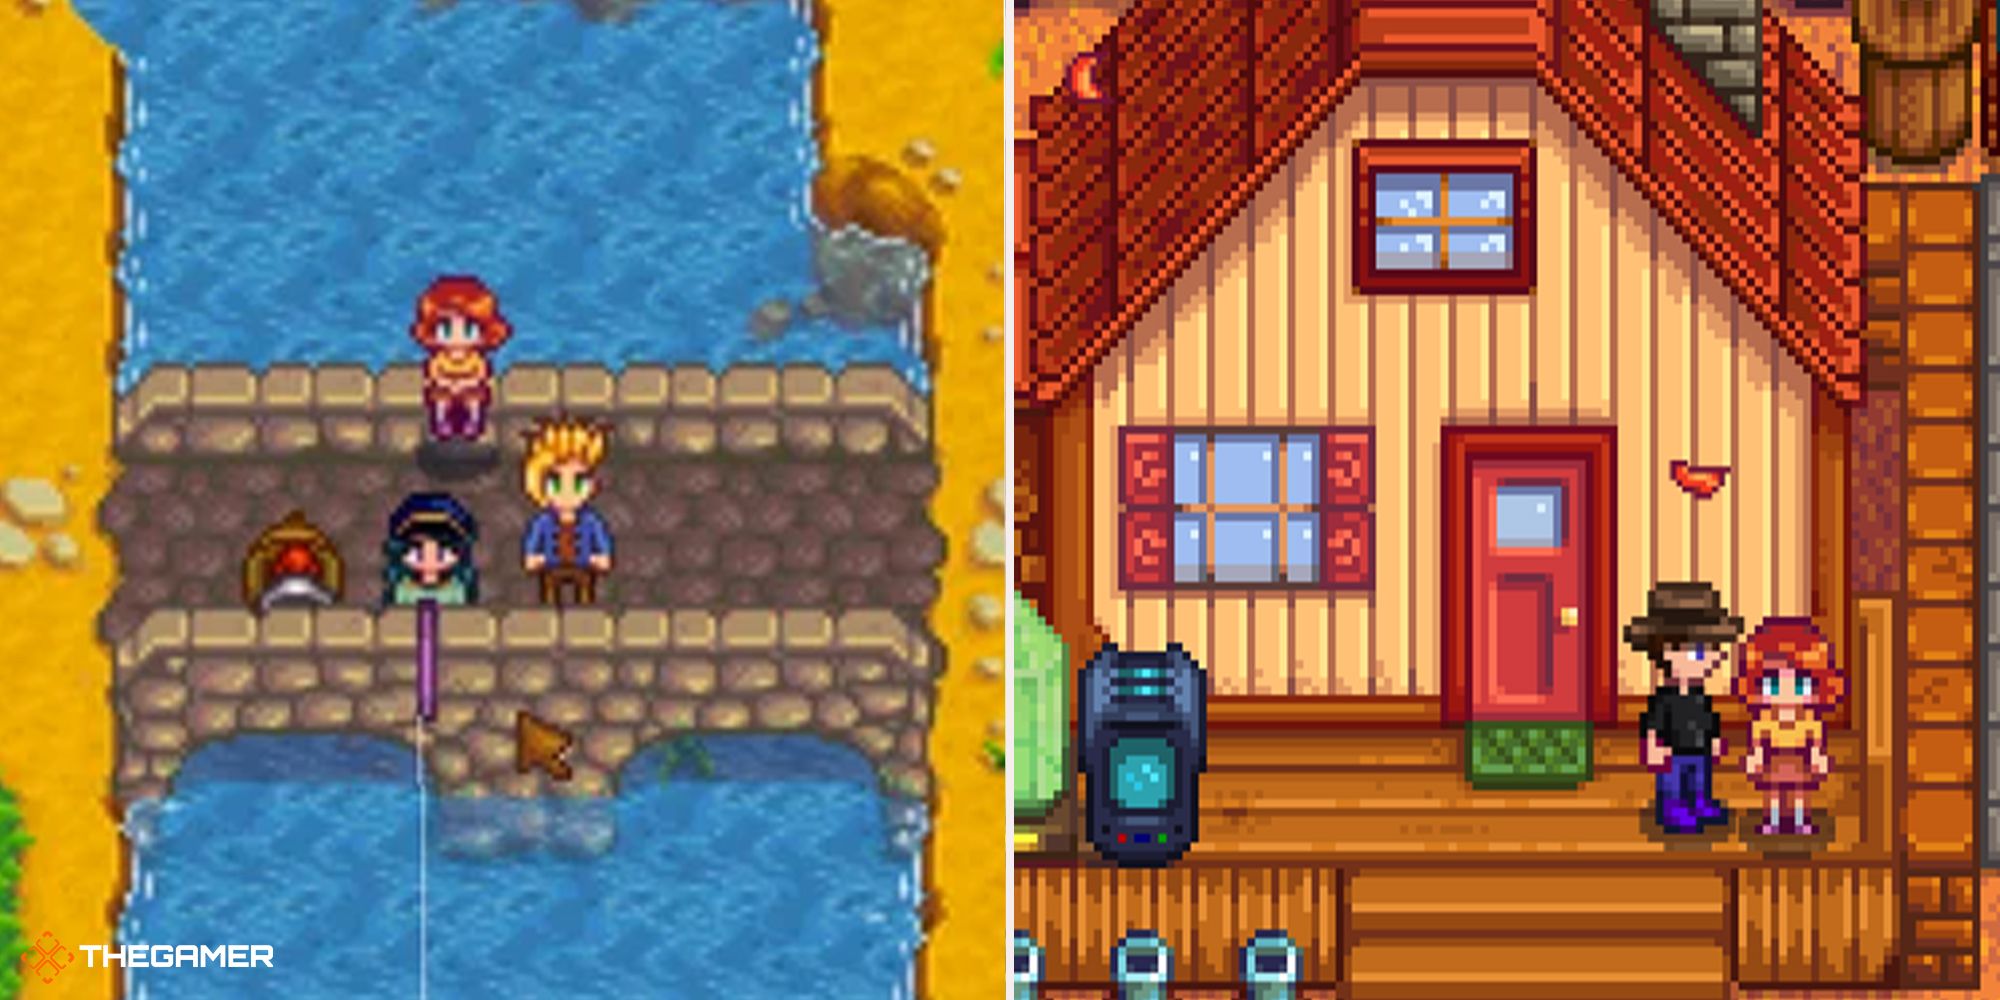 Stardew Valley - Penny at the farm (right), Penny on bridge (left)